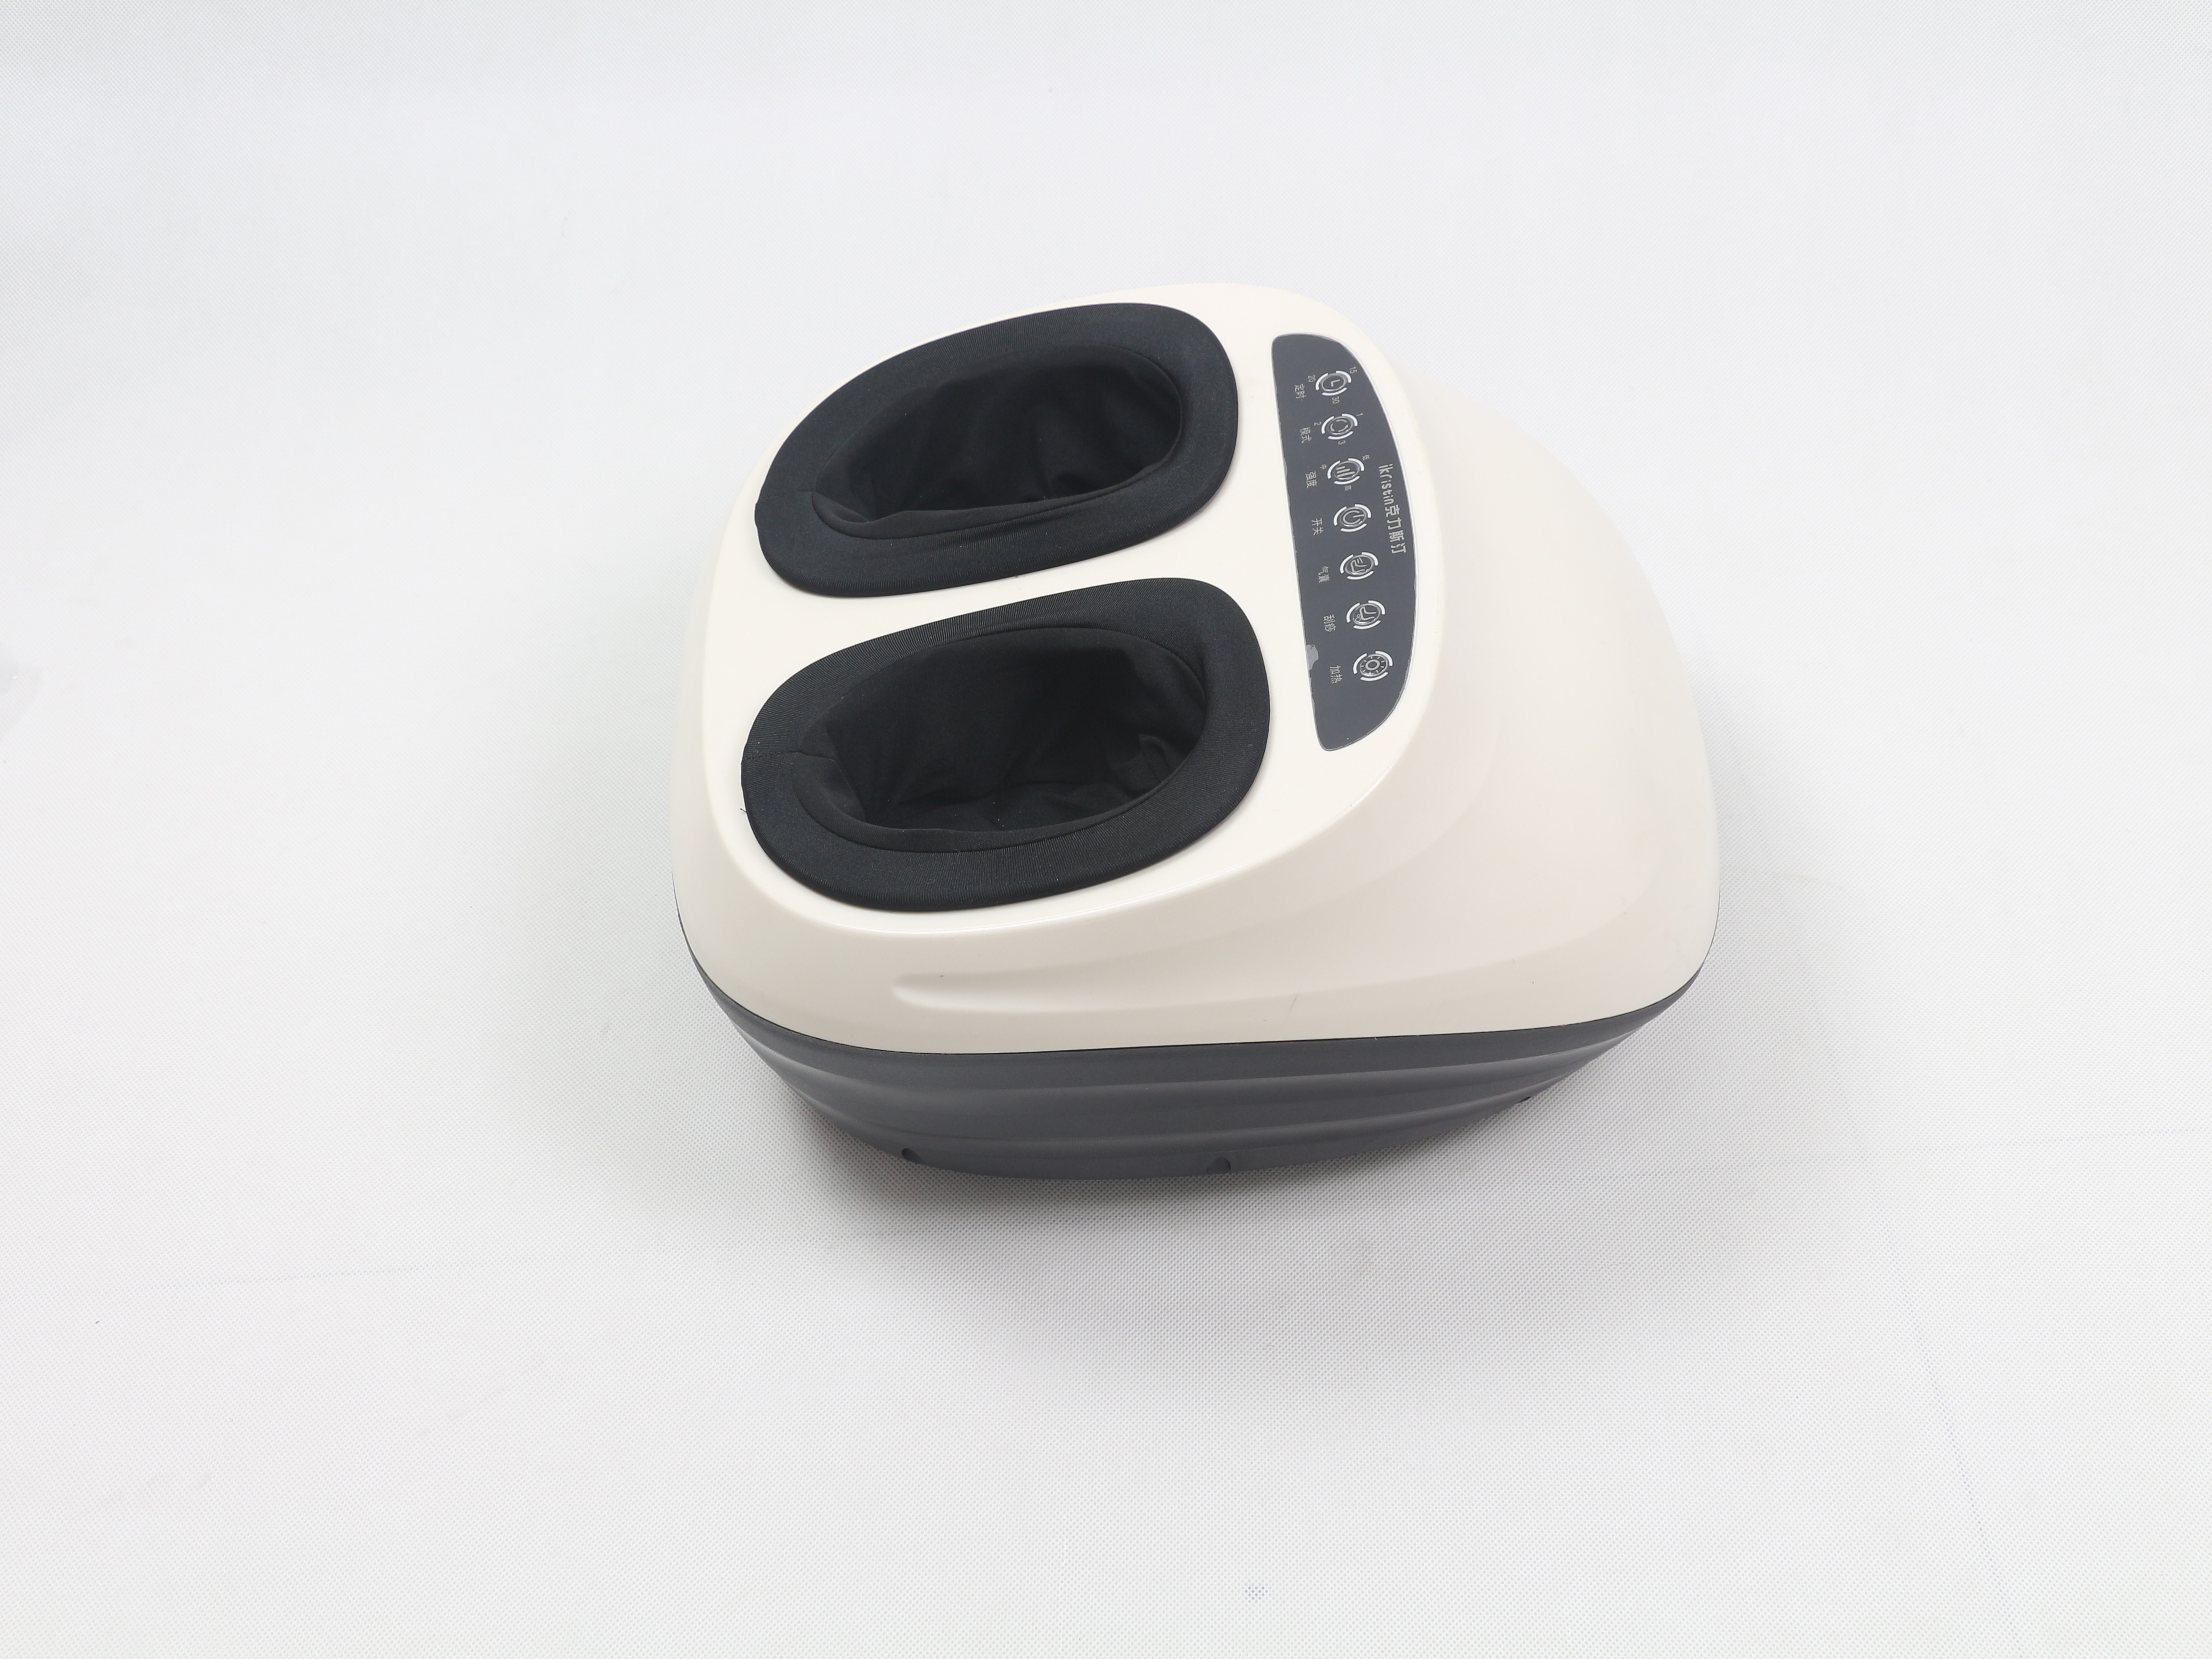 Home Use Vibrating Silver Foot Massager